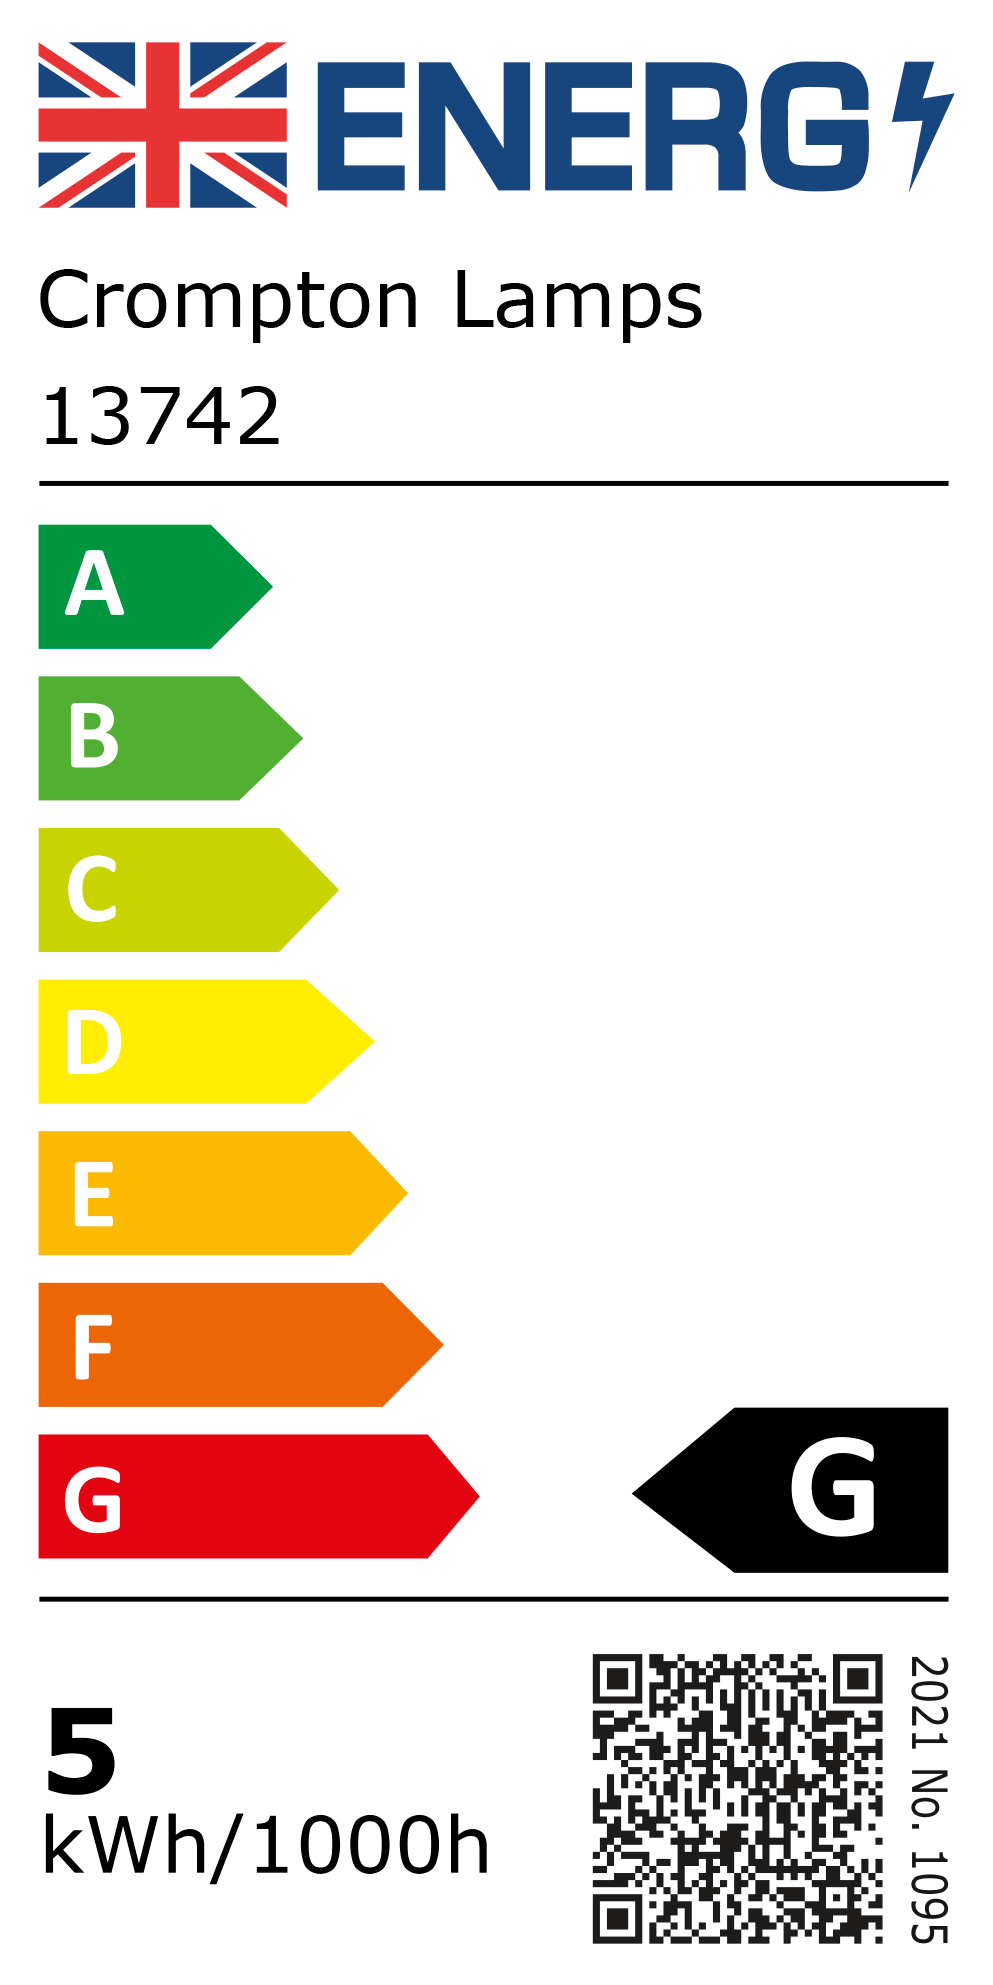 New 2021 Energy Rating Label: Stock Code 13742